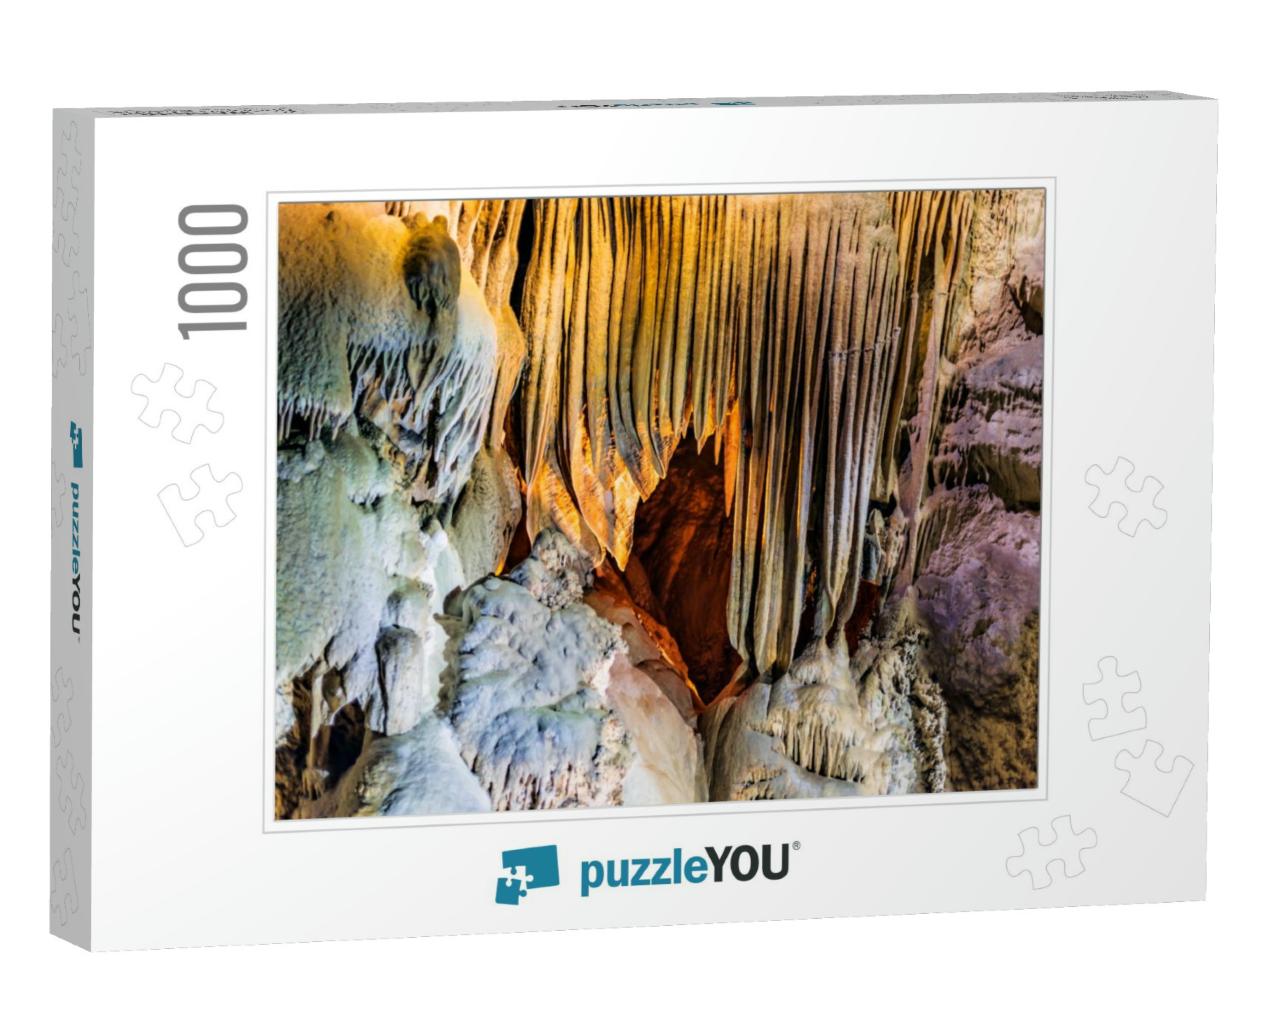 View At the Picturesque Rocks Formations in Crystal Cave... Jigsaw Puzzle with 1000 pieces